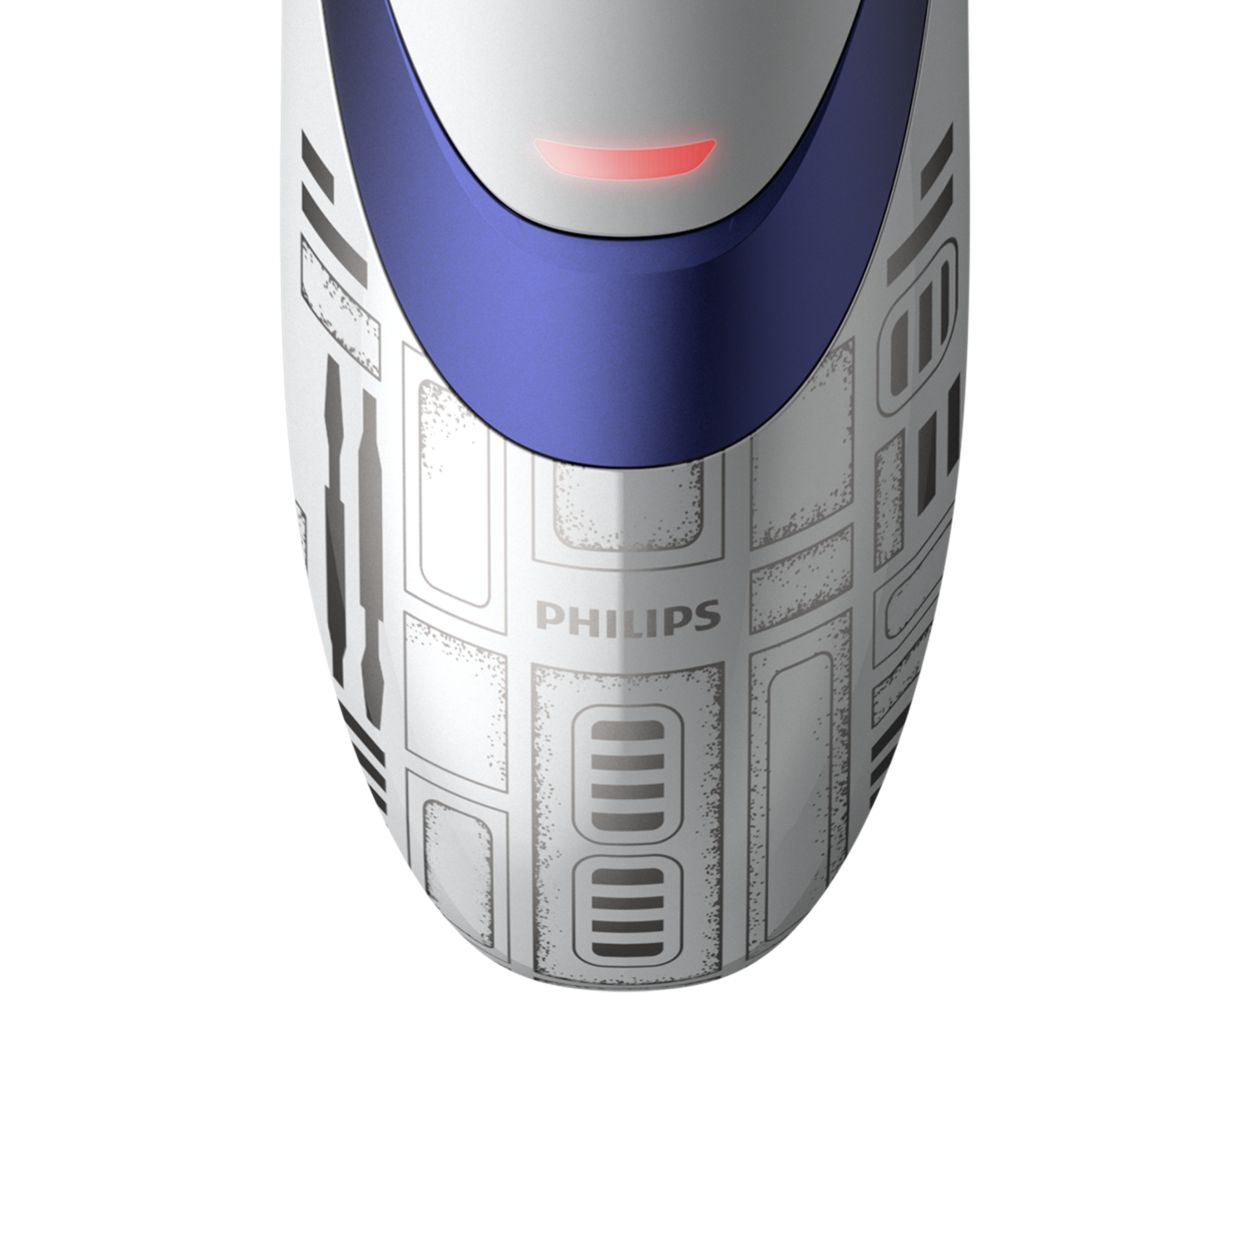 Star Wars special edition Star Wars R2D2 Electric Shaver | SW3700/87 | Philips